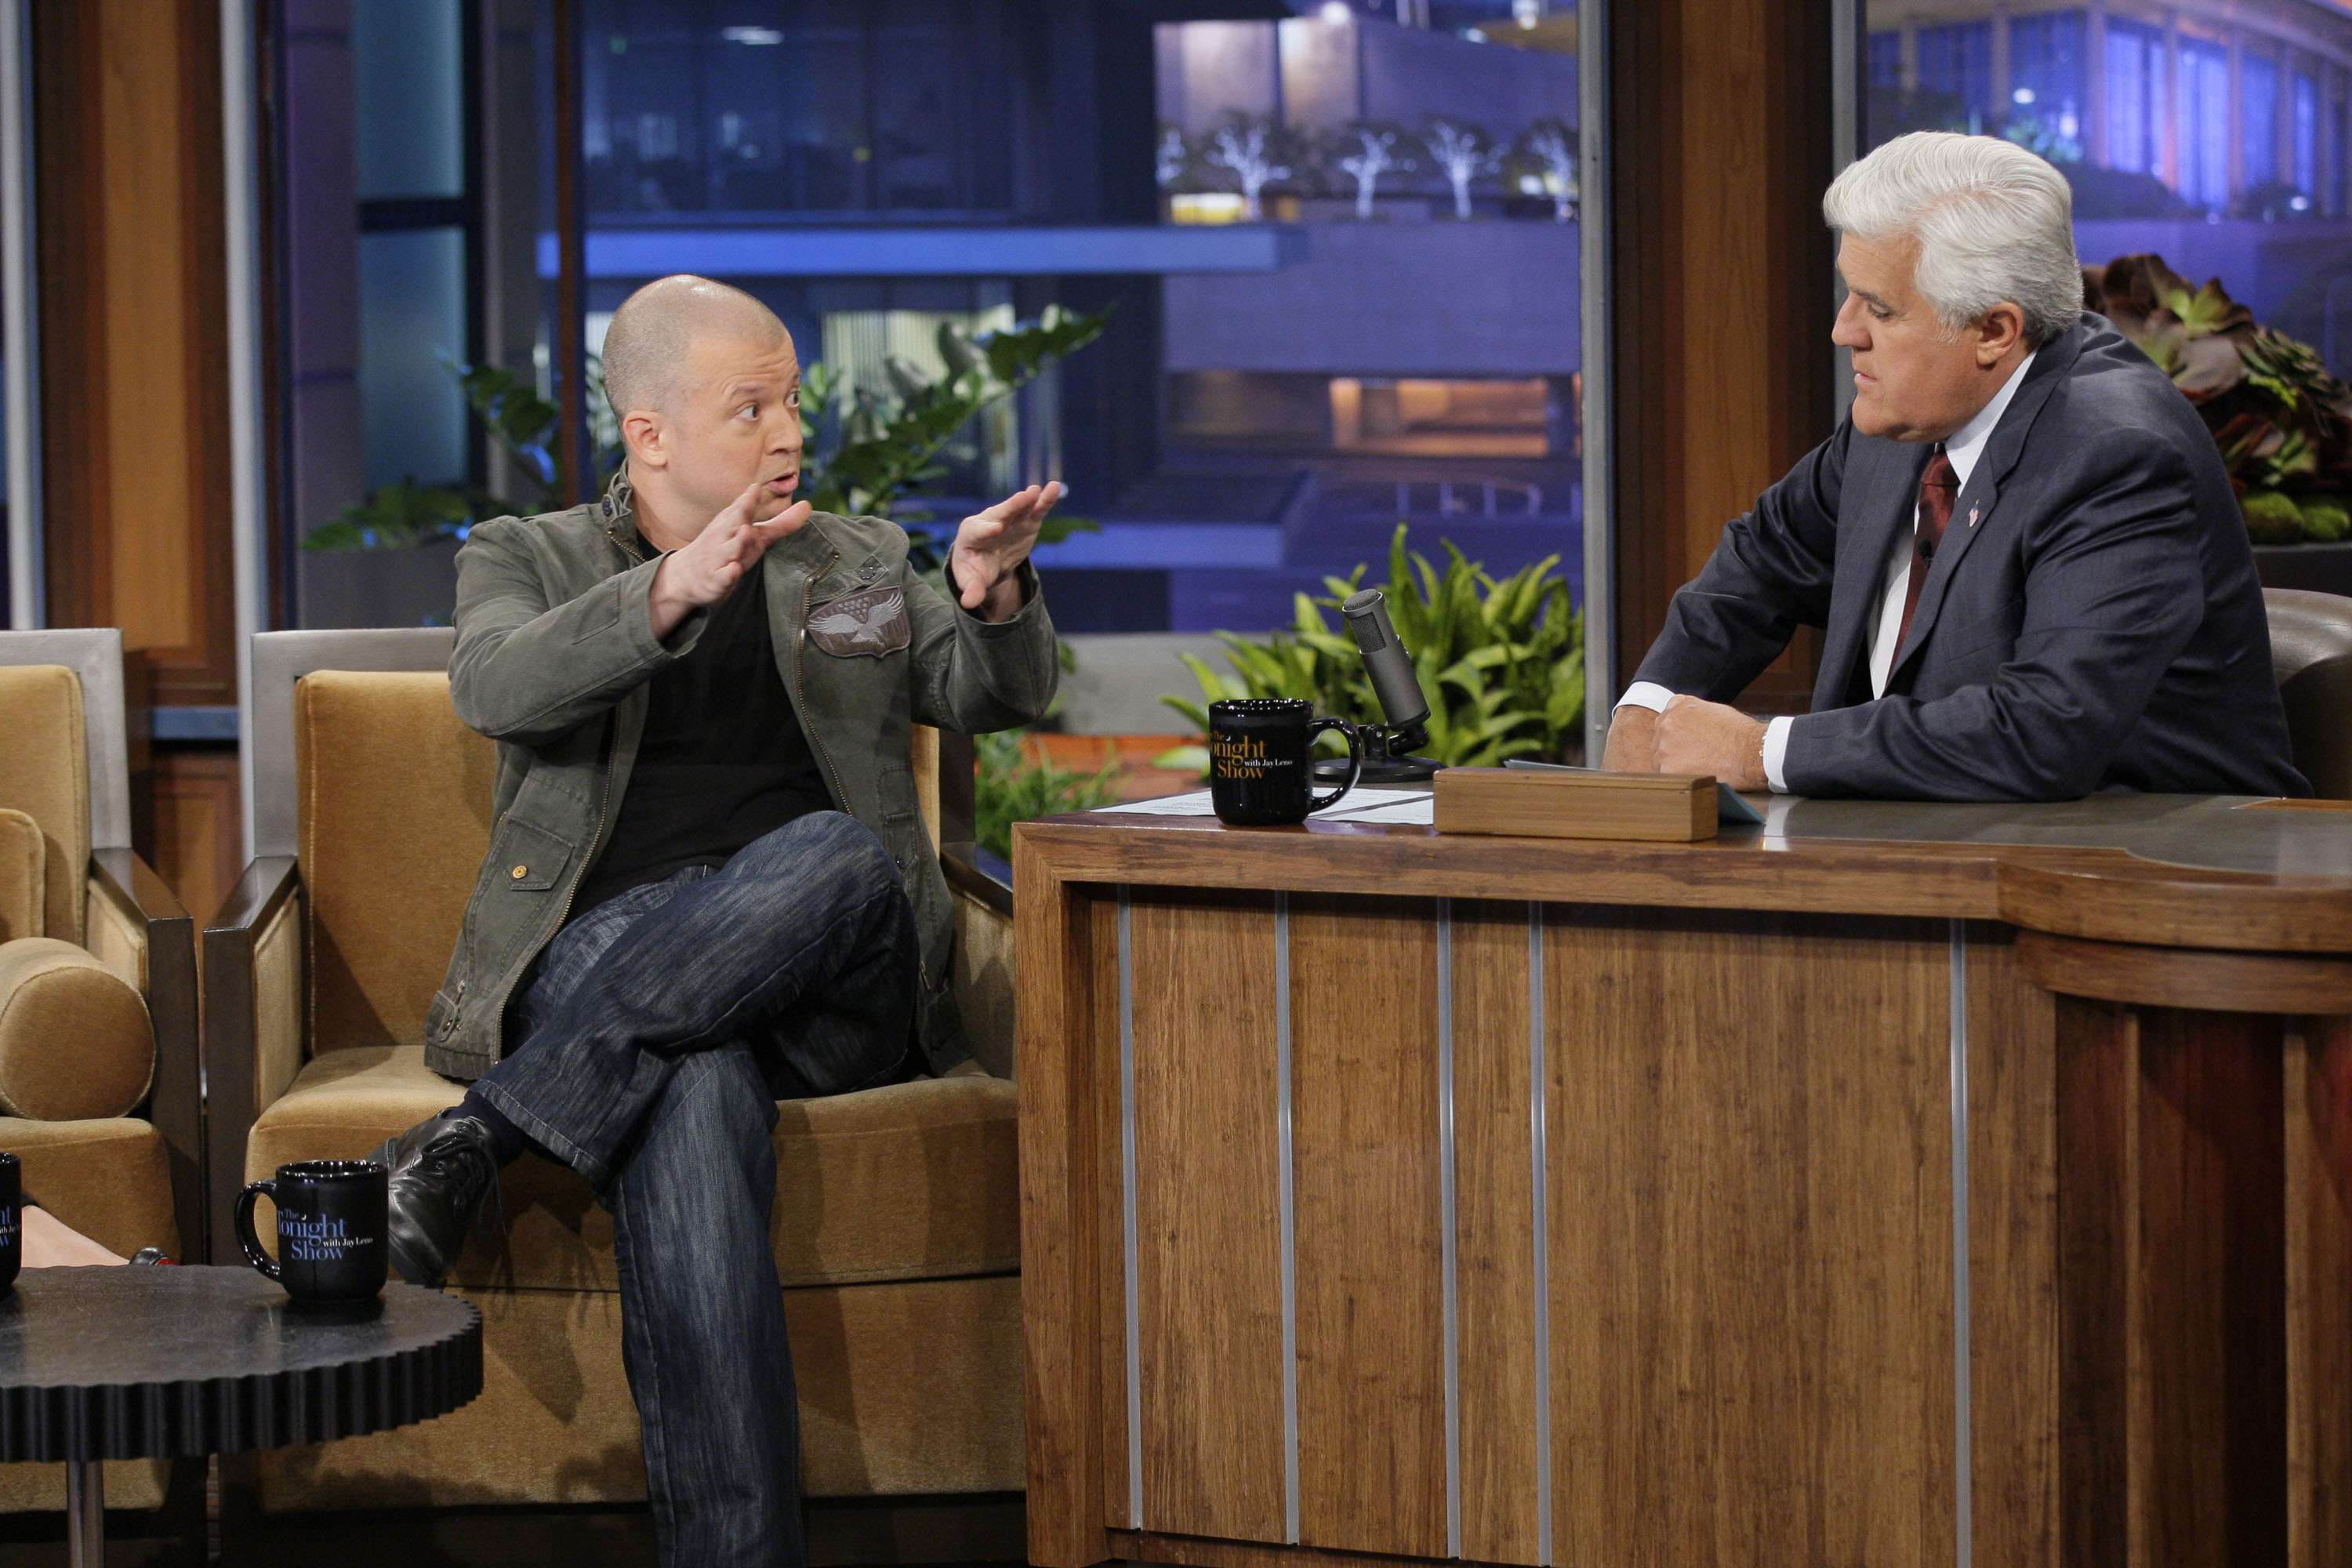 Comedian Jim Norton during an interview with host Jay Leno on June 27, 2012. (NBC/NBCU/Photo Bank/Getty Images)